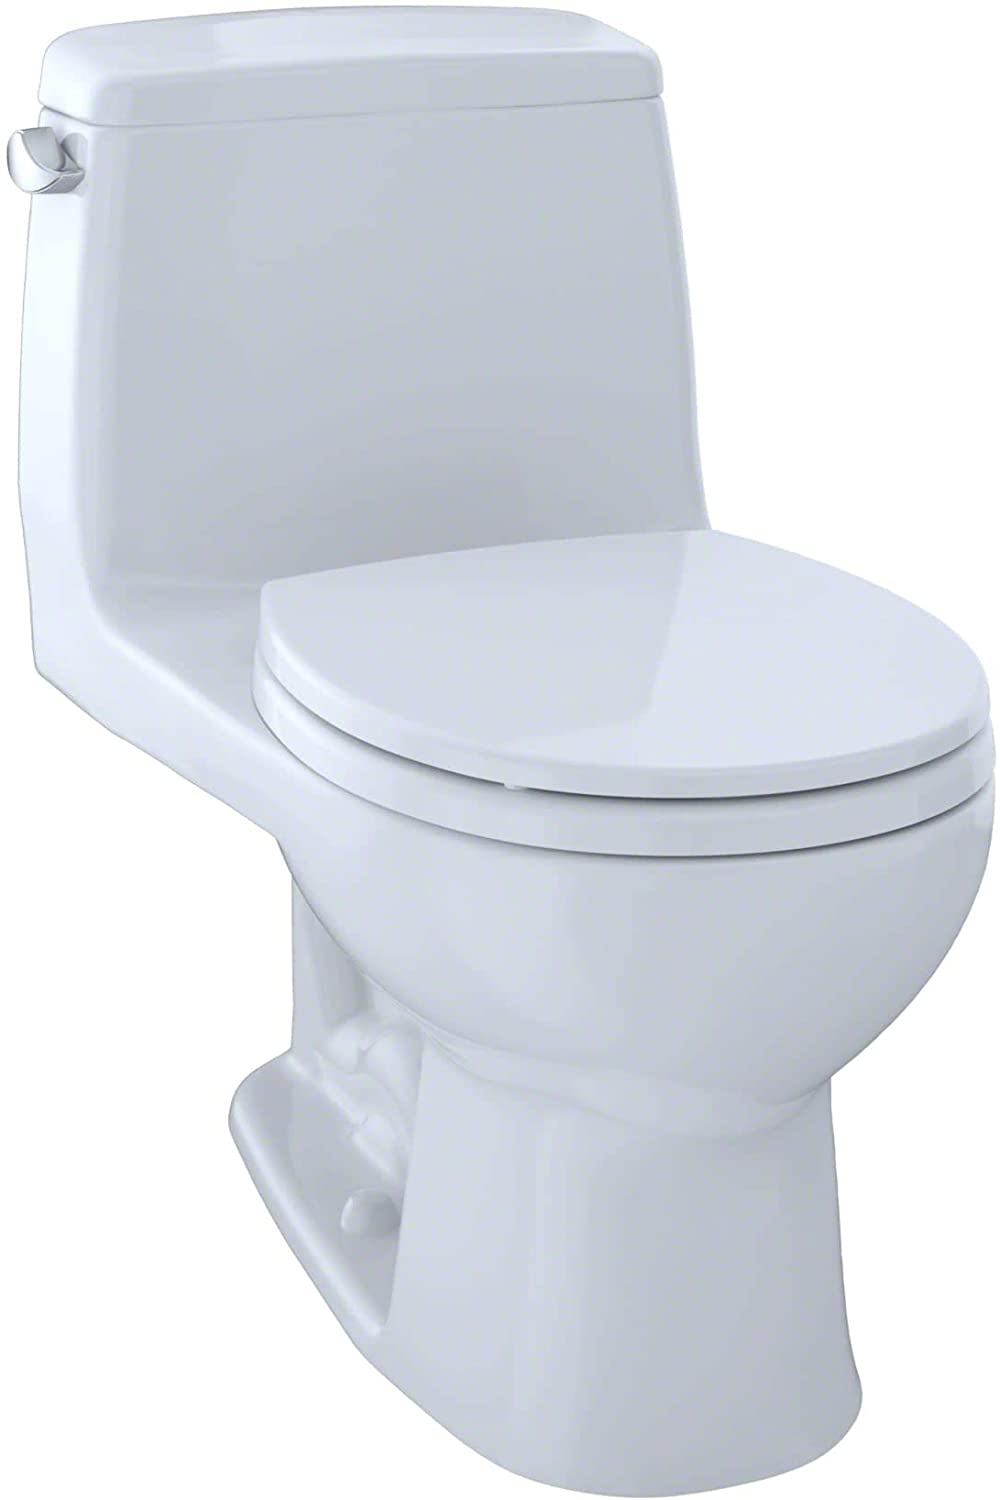 TOTO MS853113E#01 Eco Ultramax Round Front One Piece Toilet